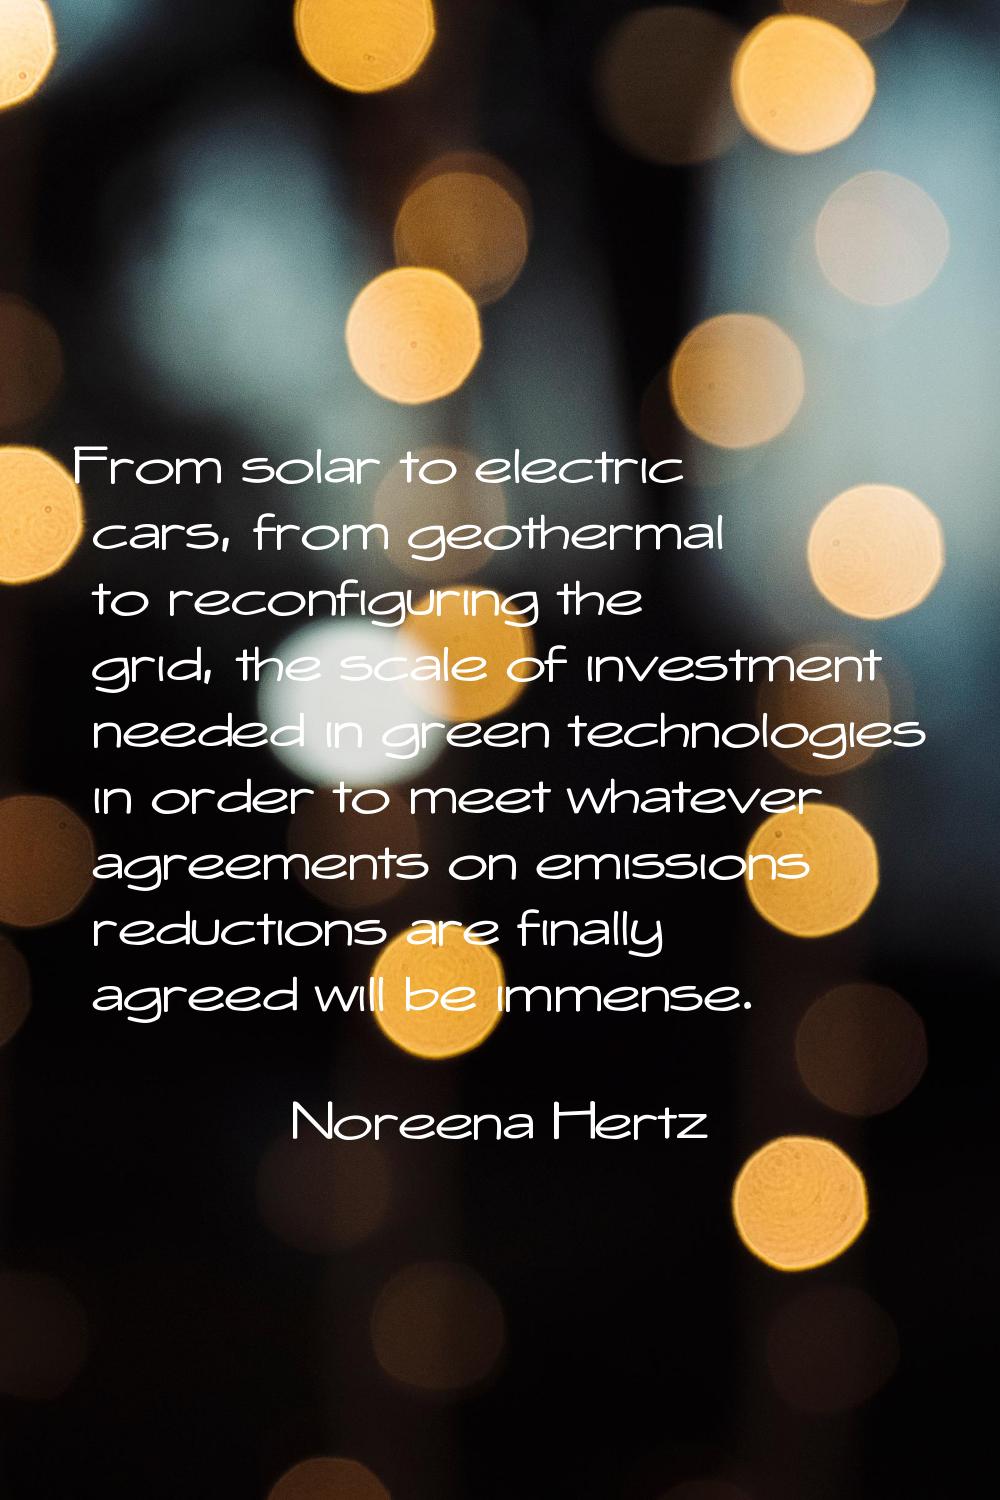 From solar to electric cars, from geothermal to reconfiguring the grid, the scale of investment nee